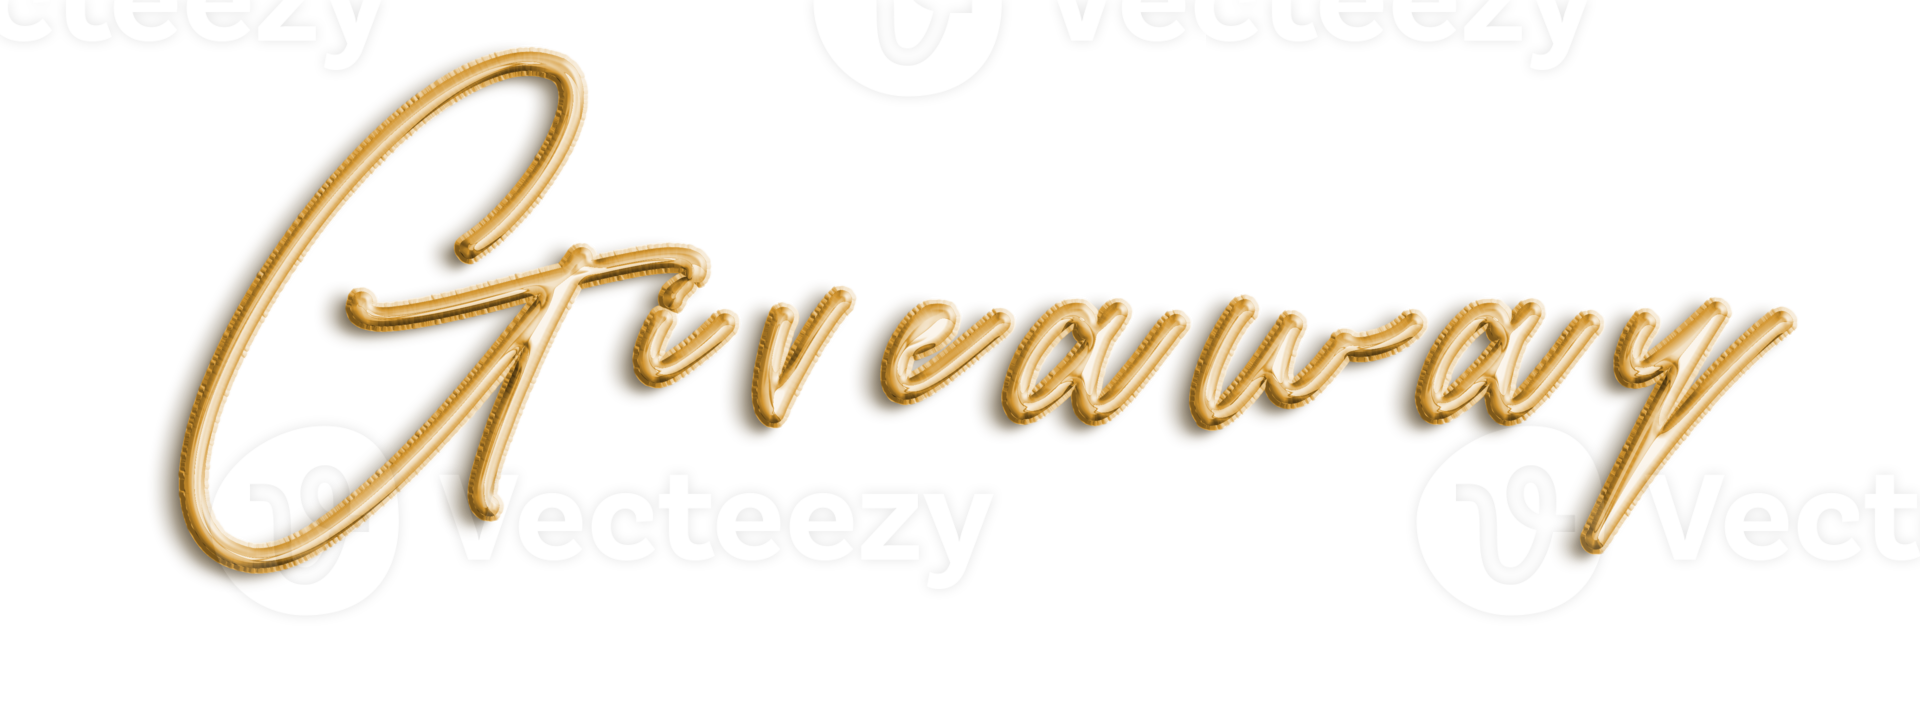 Golden Volumetric 3D Text Balloons Lettering Giveaway cut out png